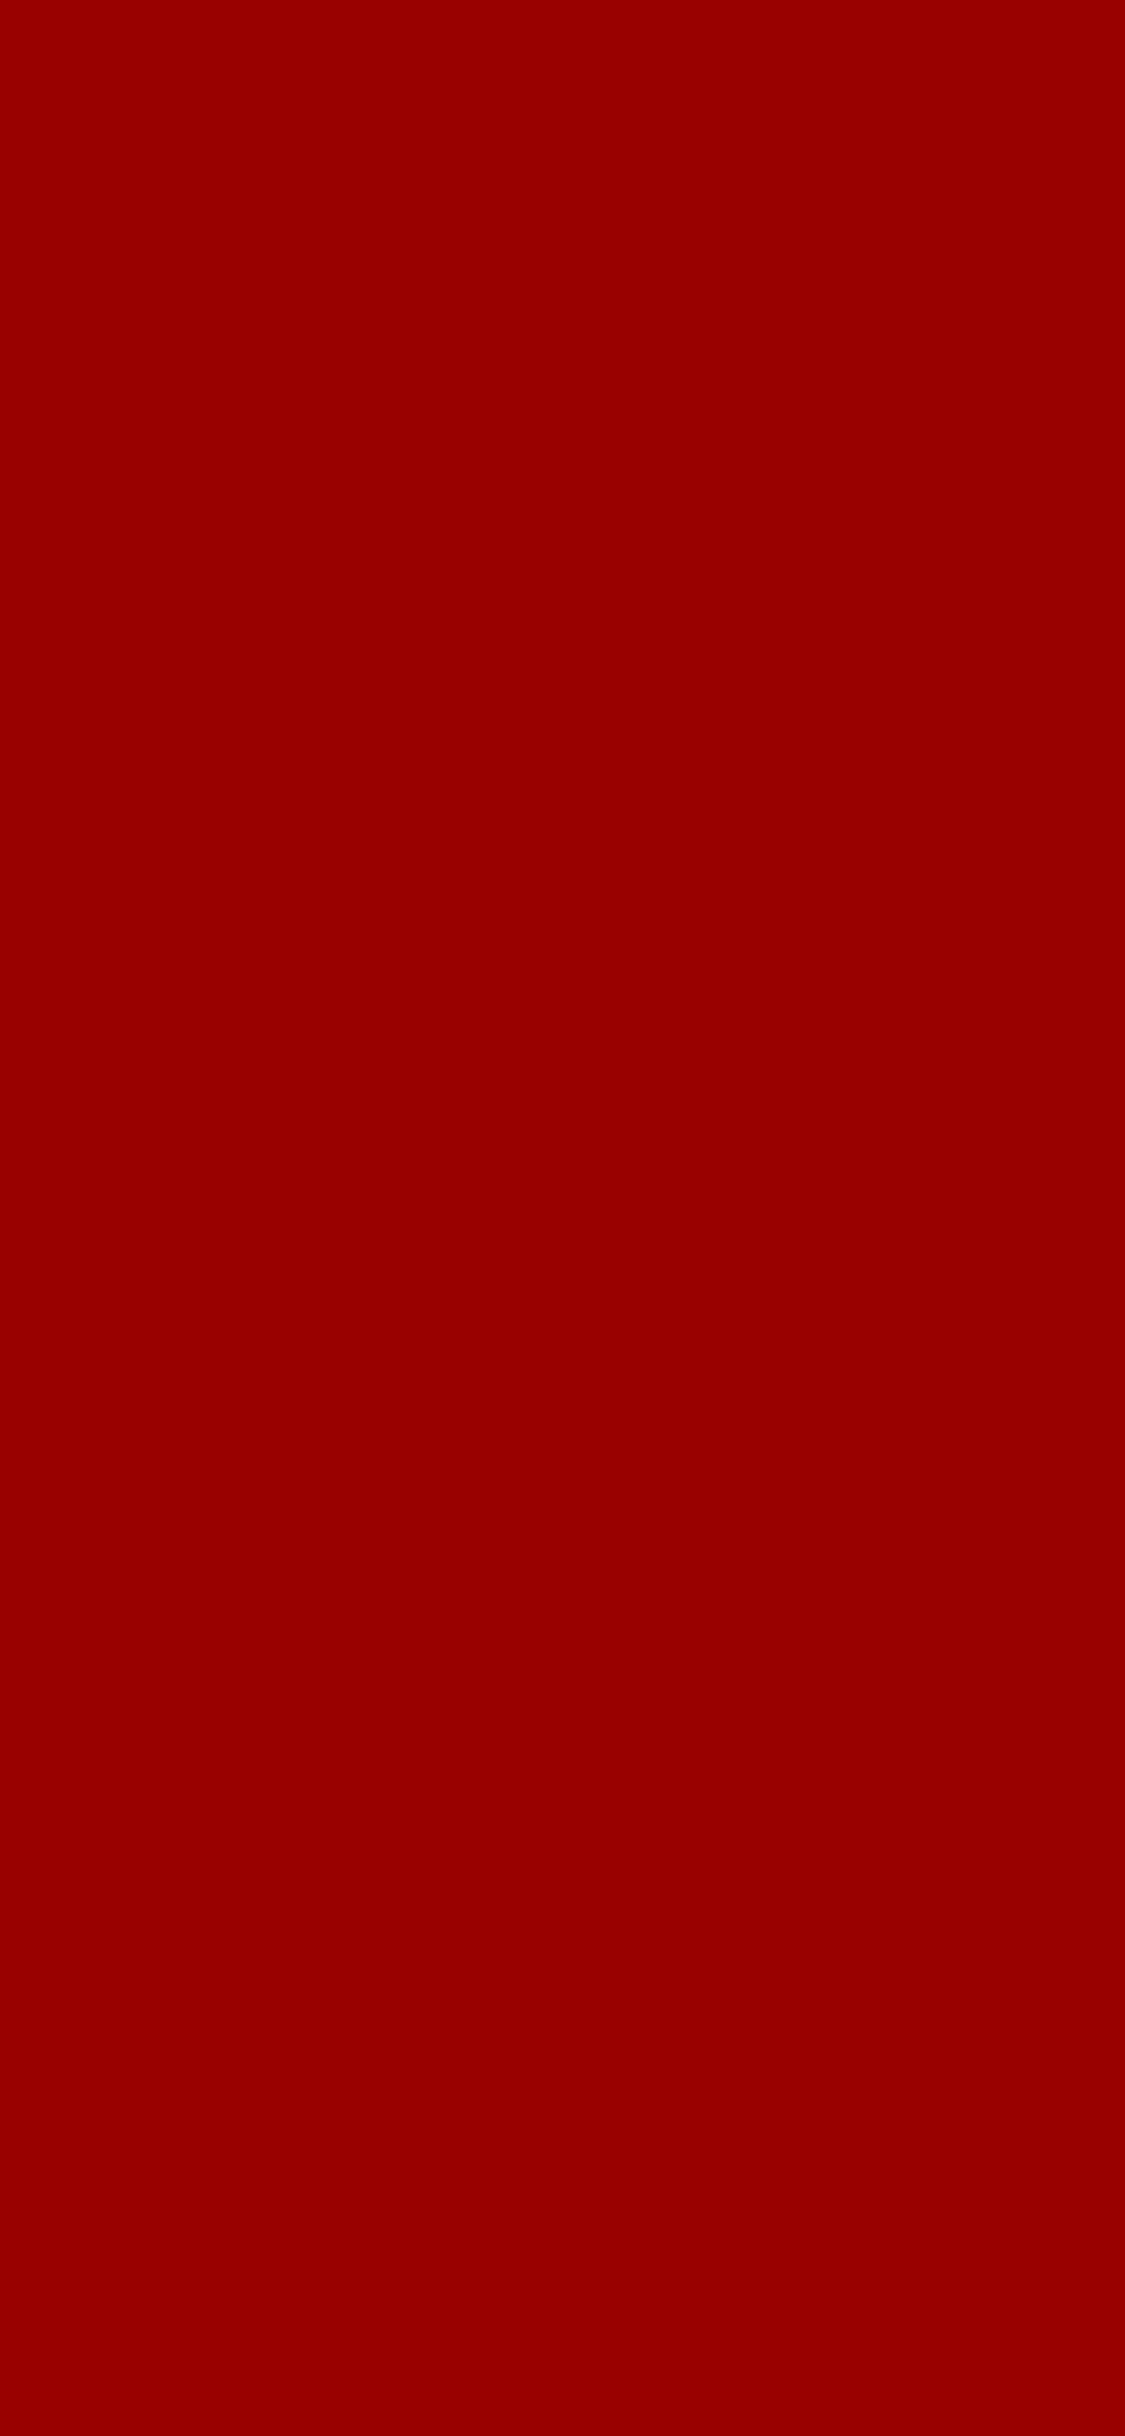 1125x2436 OU Crimson Red Solid Color Background